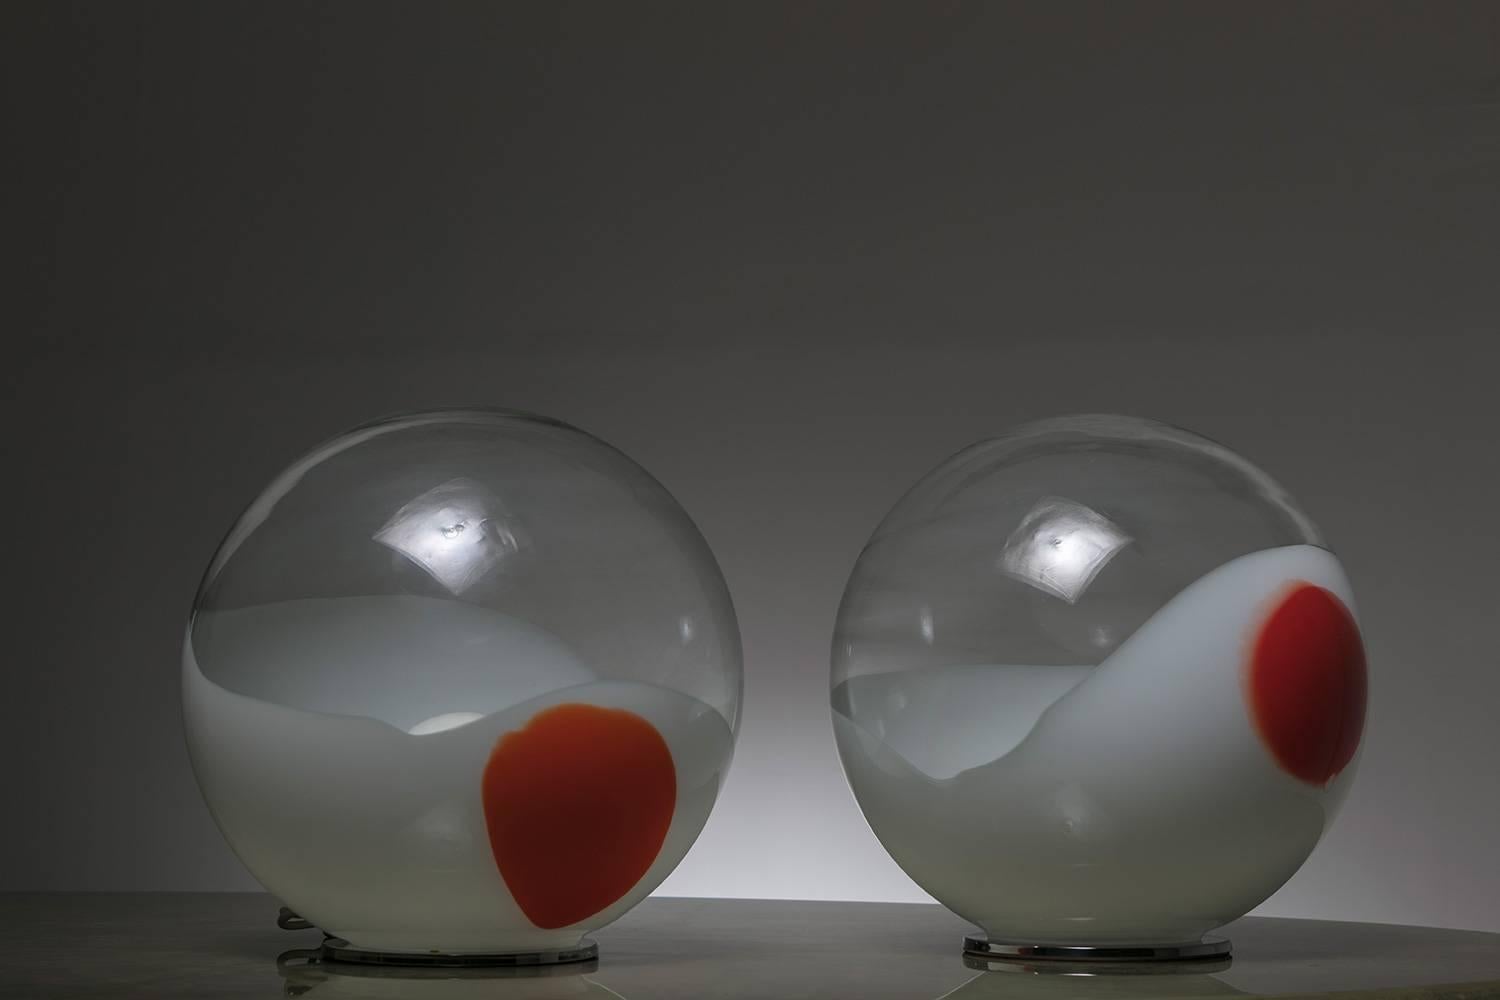 Pair of Murano glass table lamps by Angelo Brotto for Esperia.
The light source is hidden by a first opal glass sphere and then diffused in the big milky and red decorated outer sphere.
        